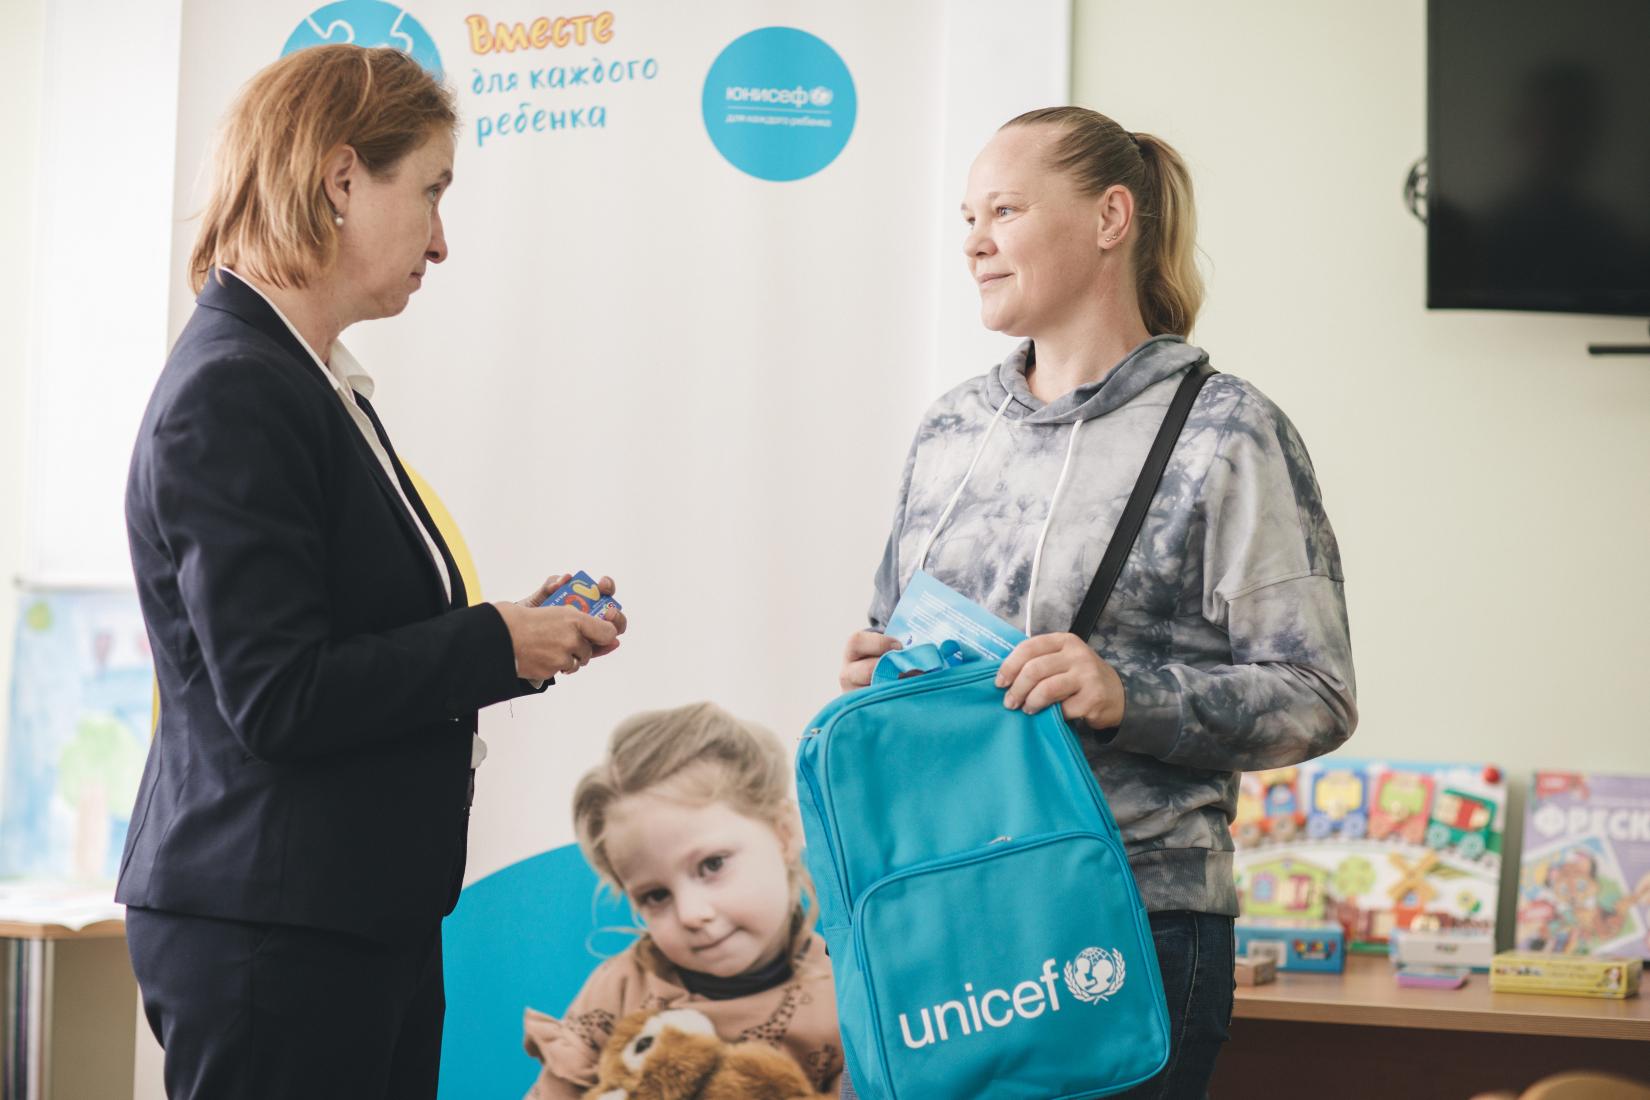 In Brest, at a bus station, UNICEF and UNHCR, operate an information point where families arriving in Belarus access information and legal assistance, protection services, psychological support, and other services and assistance